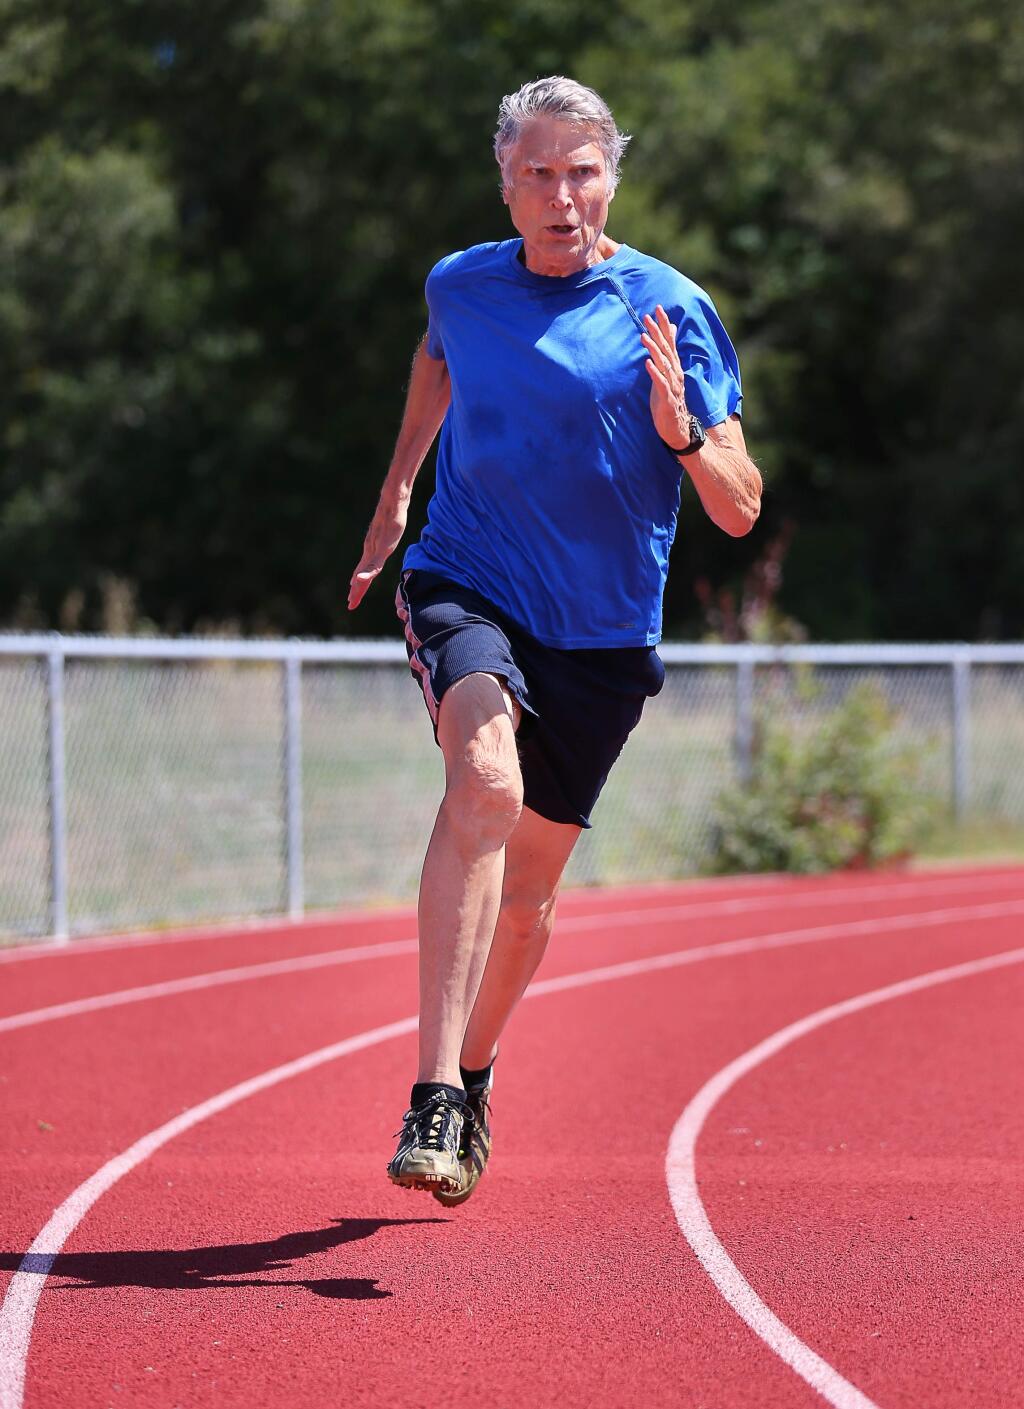 Masters track athlete Larry Barnum, 75, runs the curve at the El Molino High School track in Forestville on Thursday, June 20, 2019. (Christopher Chung / The Press Democrat)